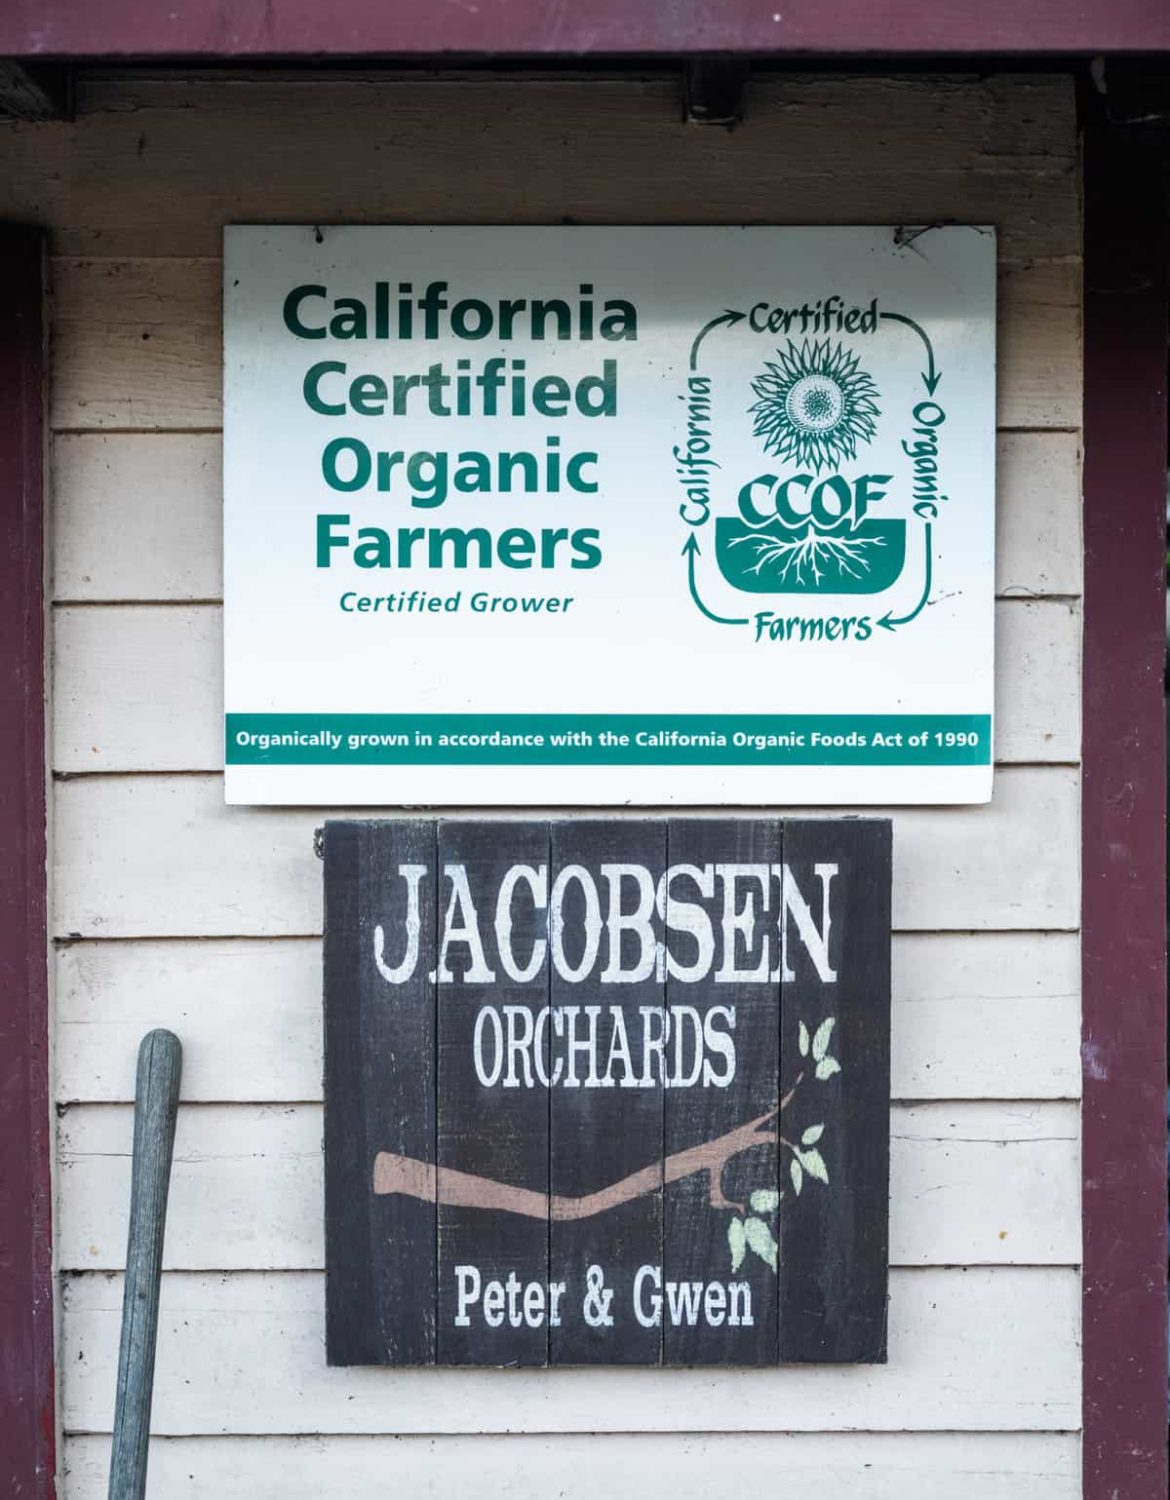 COOF sign at Jacobsen Orchards urban farm in Napa Valley, CA